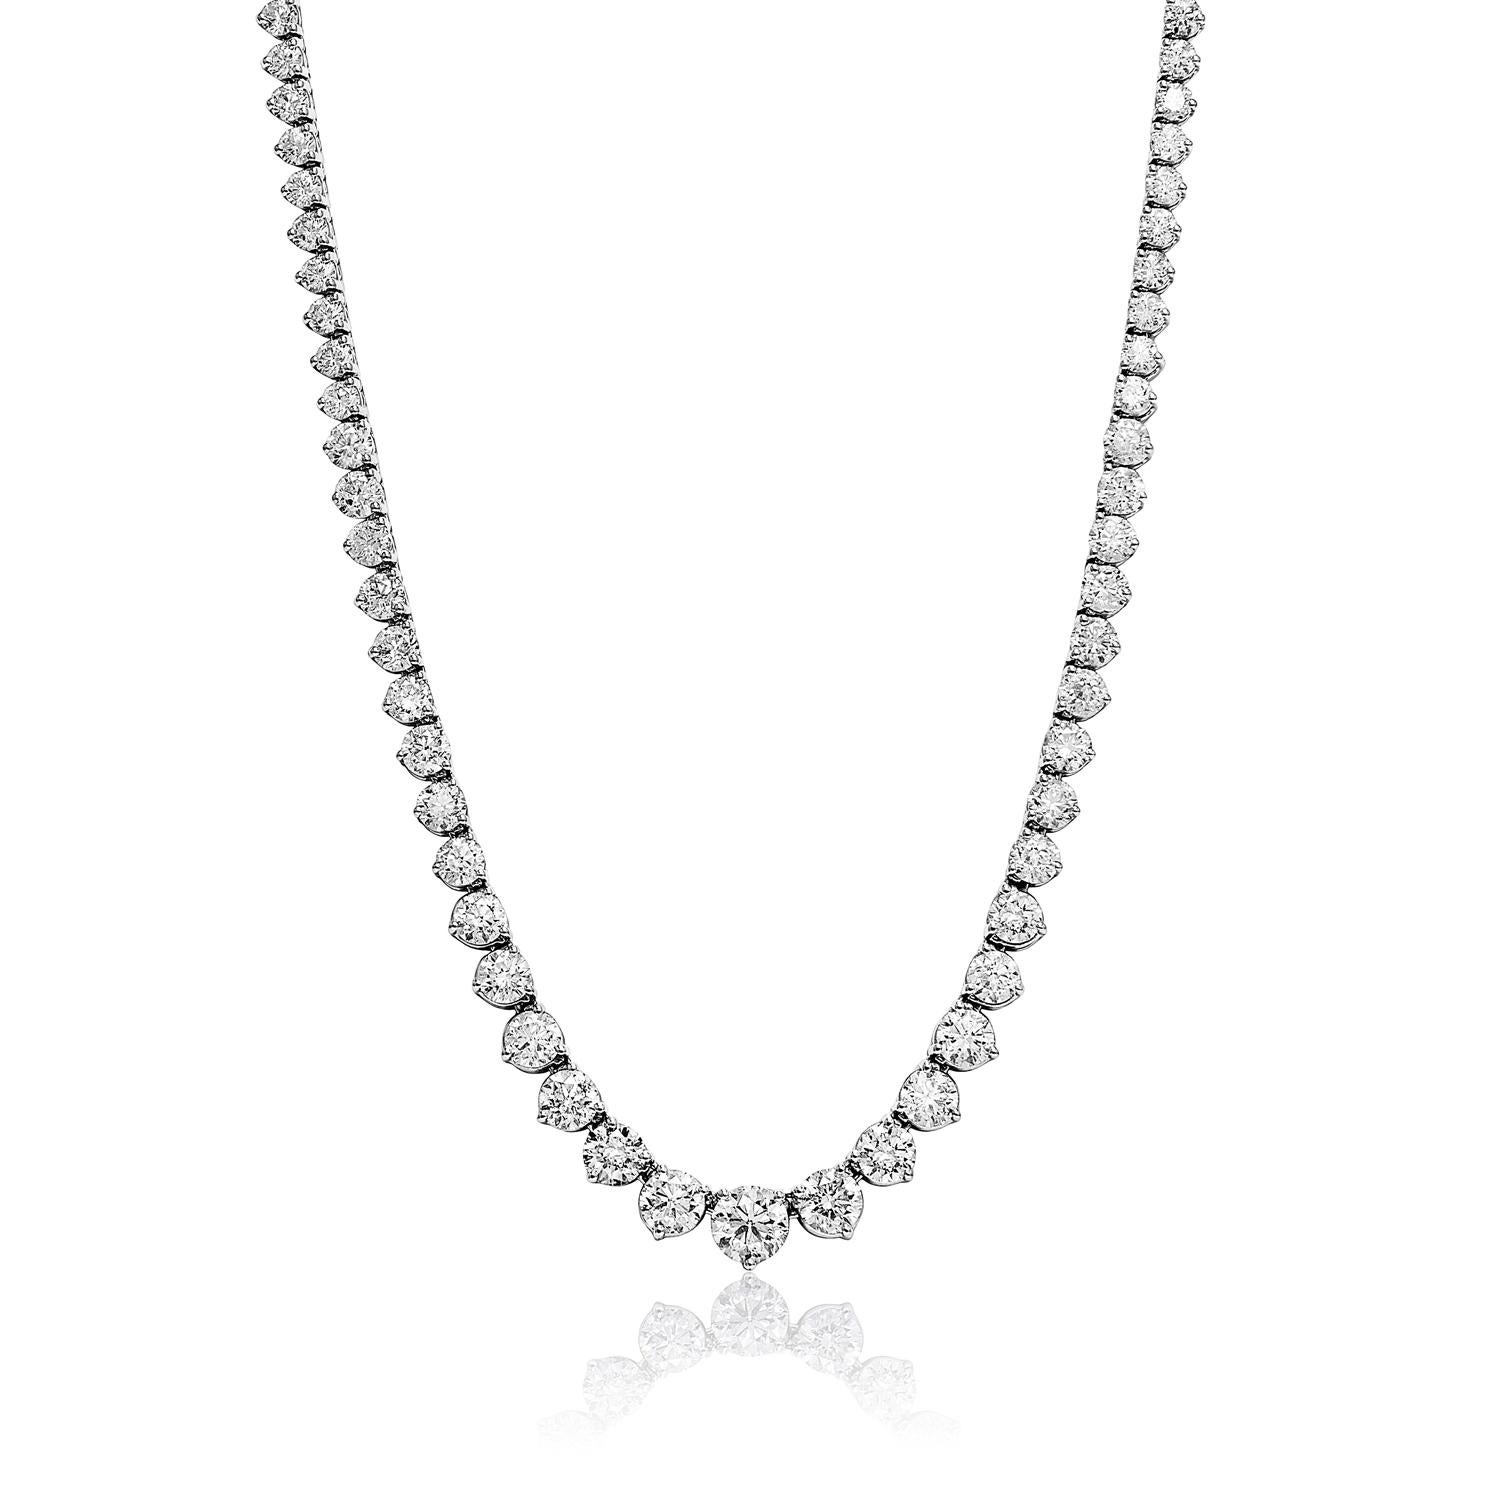 Introducing the Earth Mined Diamond Necklace for Ladies. This beautiful necklace features a stunning round brilliant cut diamond weighing in at 22.96 carats. The diamond is set in a 14 karat white gold setting and hangs from a 29.60 grams white gold